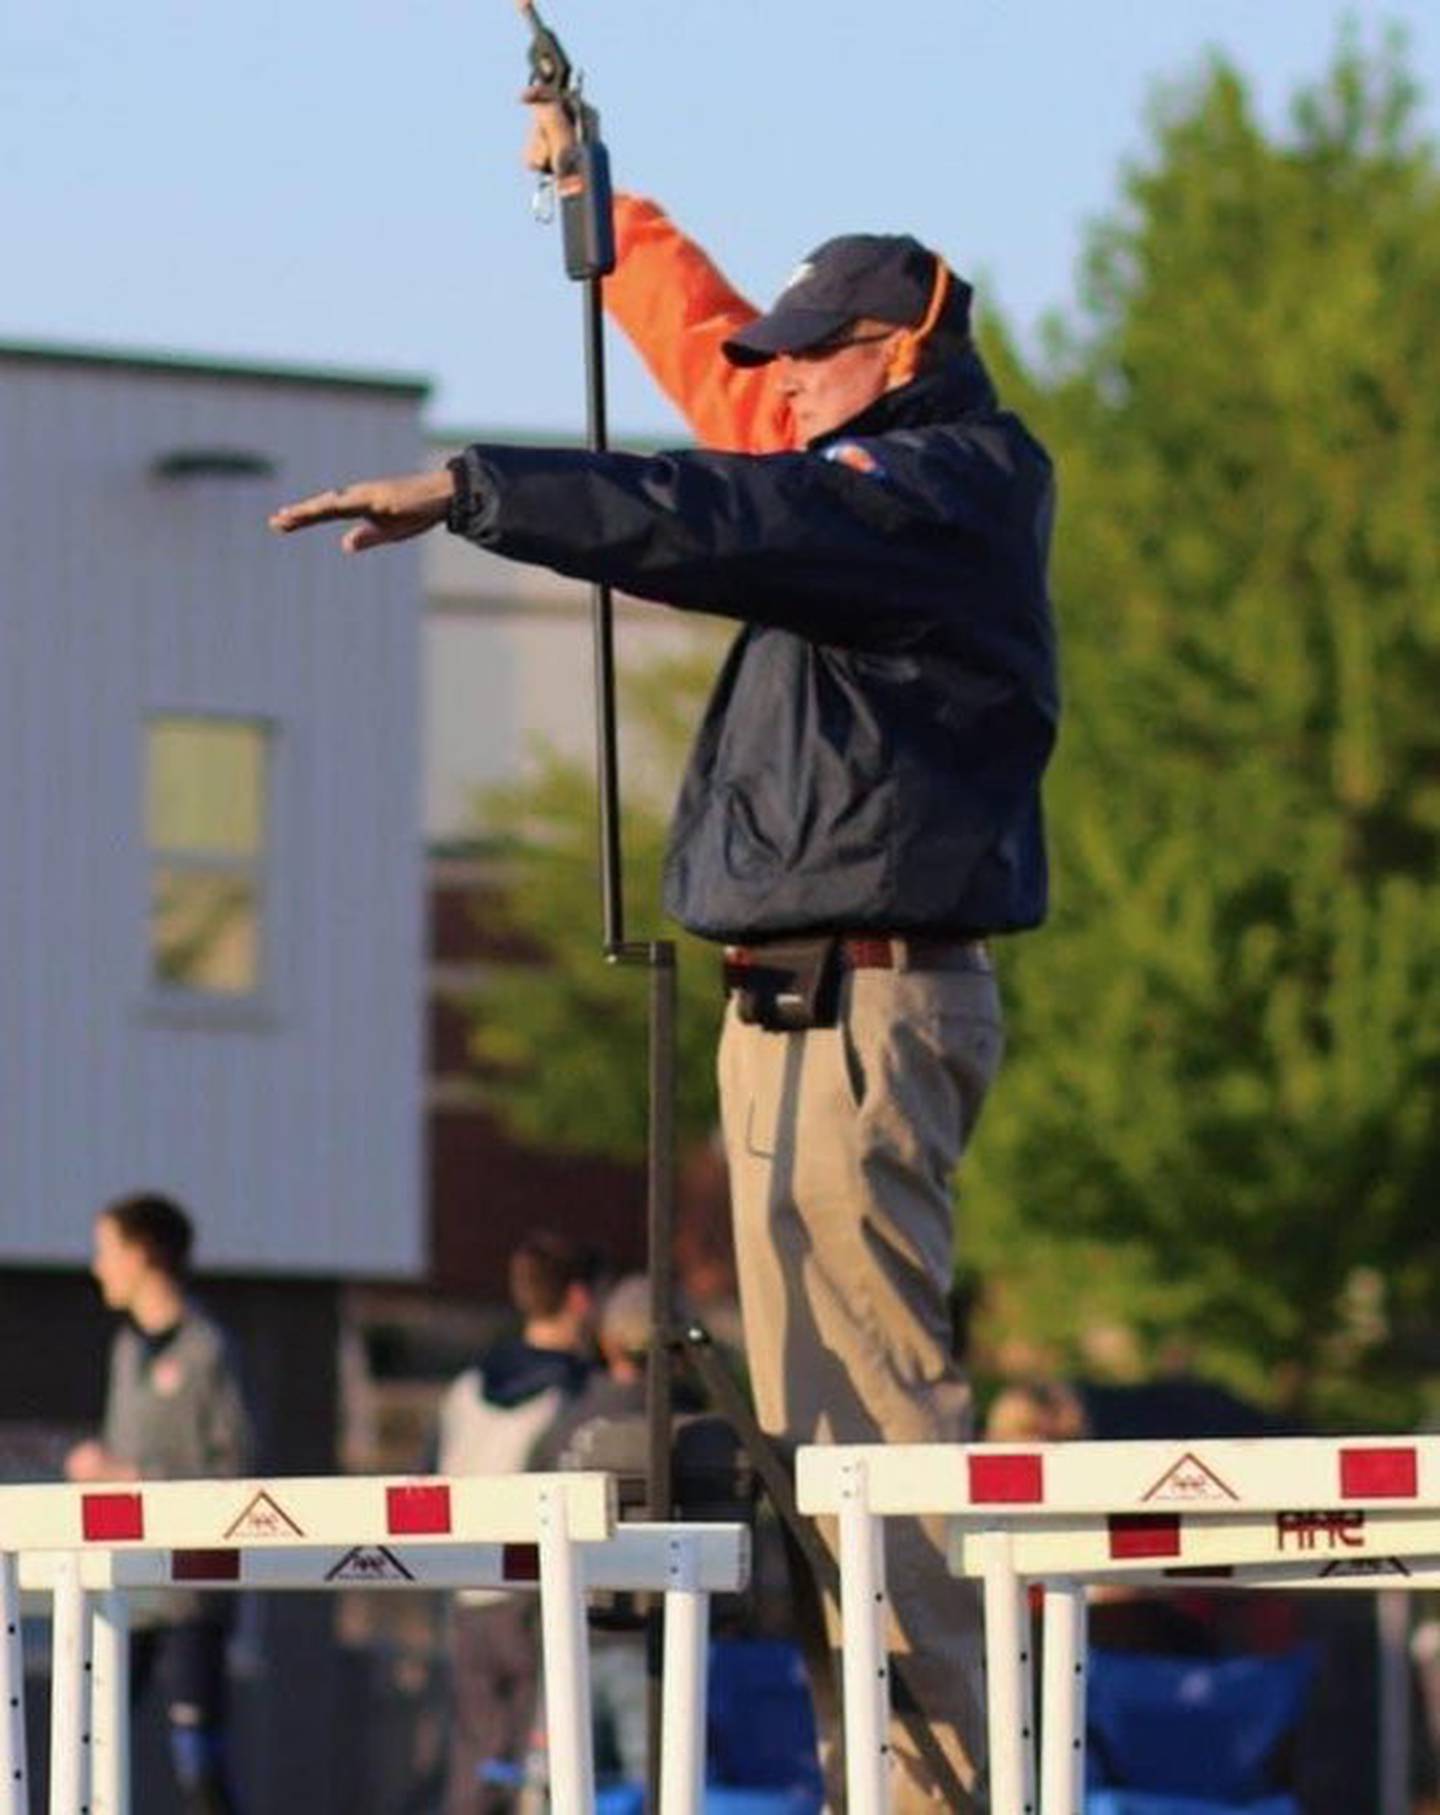 Mike Schnable, who was a longtime IHSA track and field official in addition to his Hall of Fame coaching career at Oswego High School, died on March 21. He was 73.